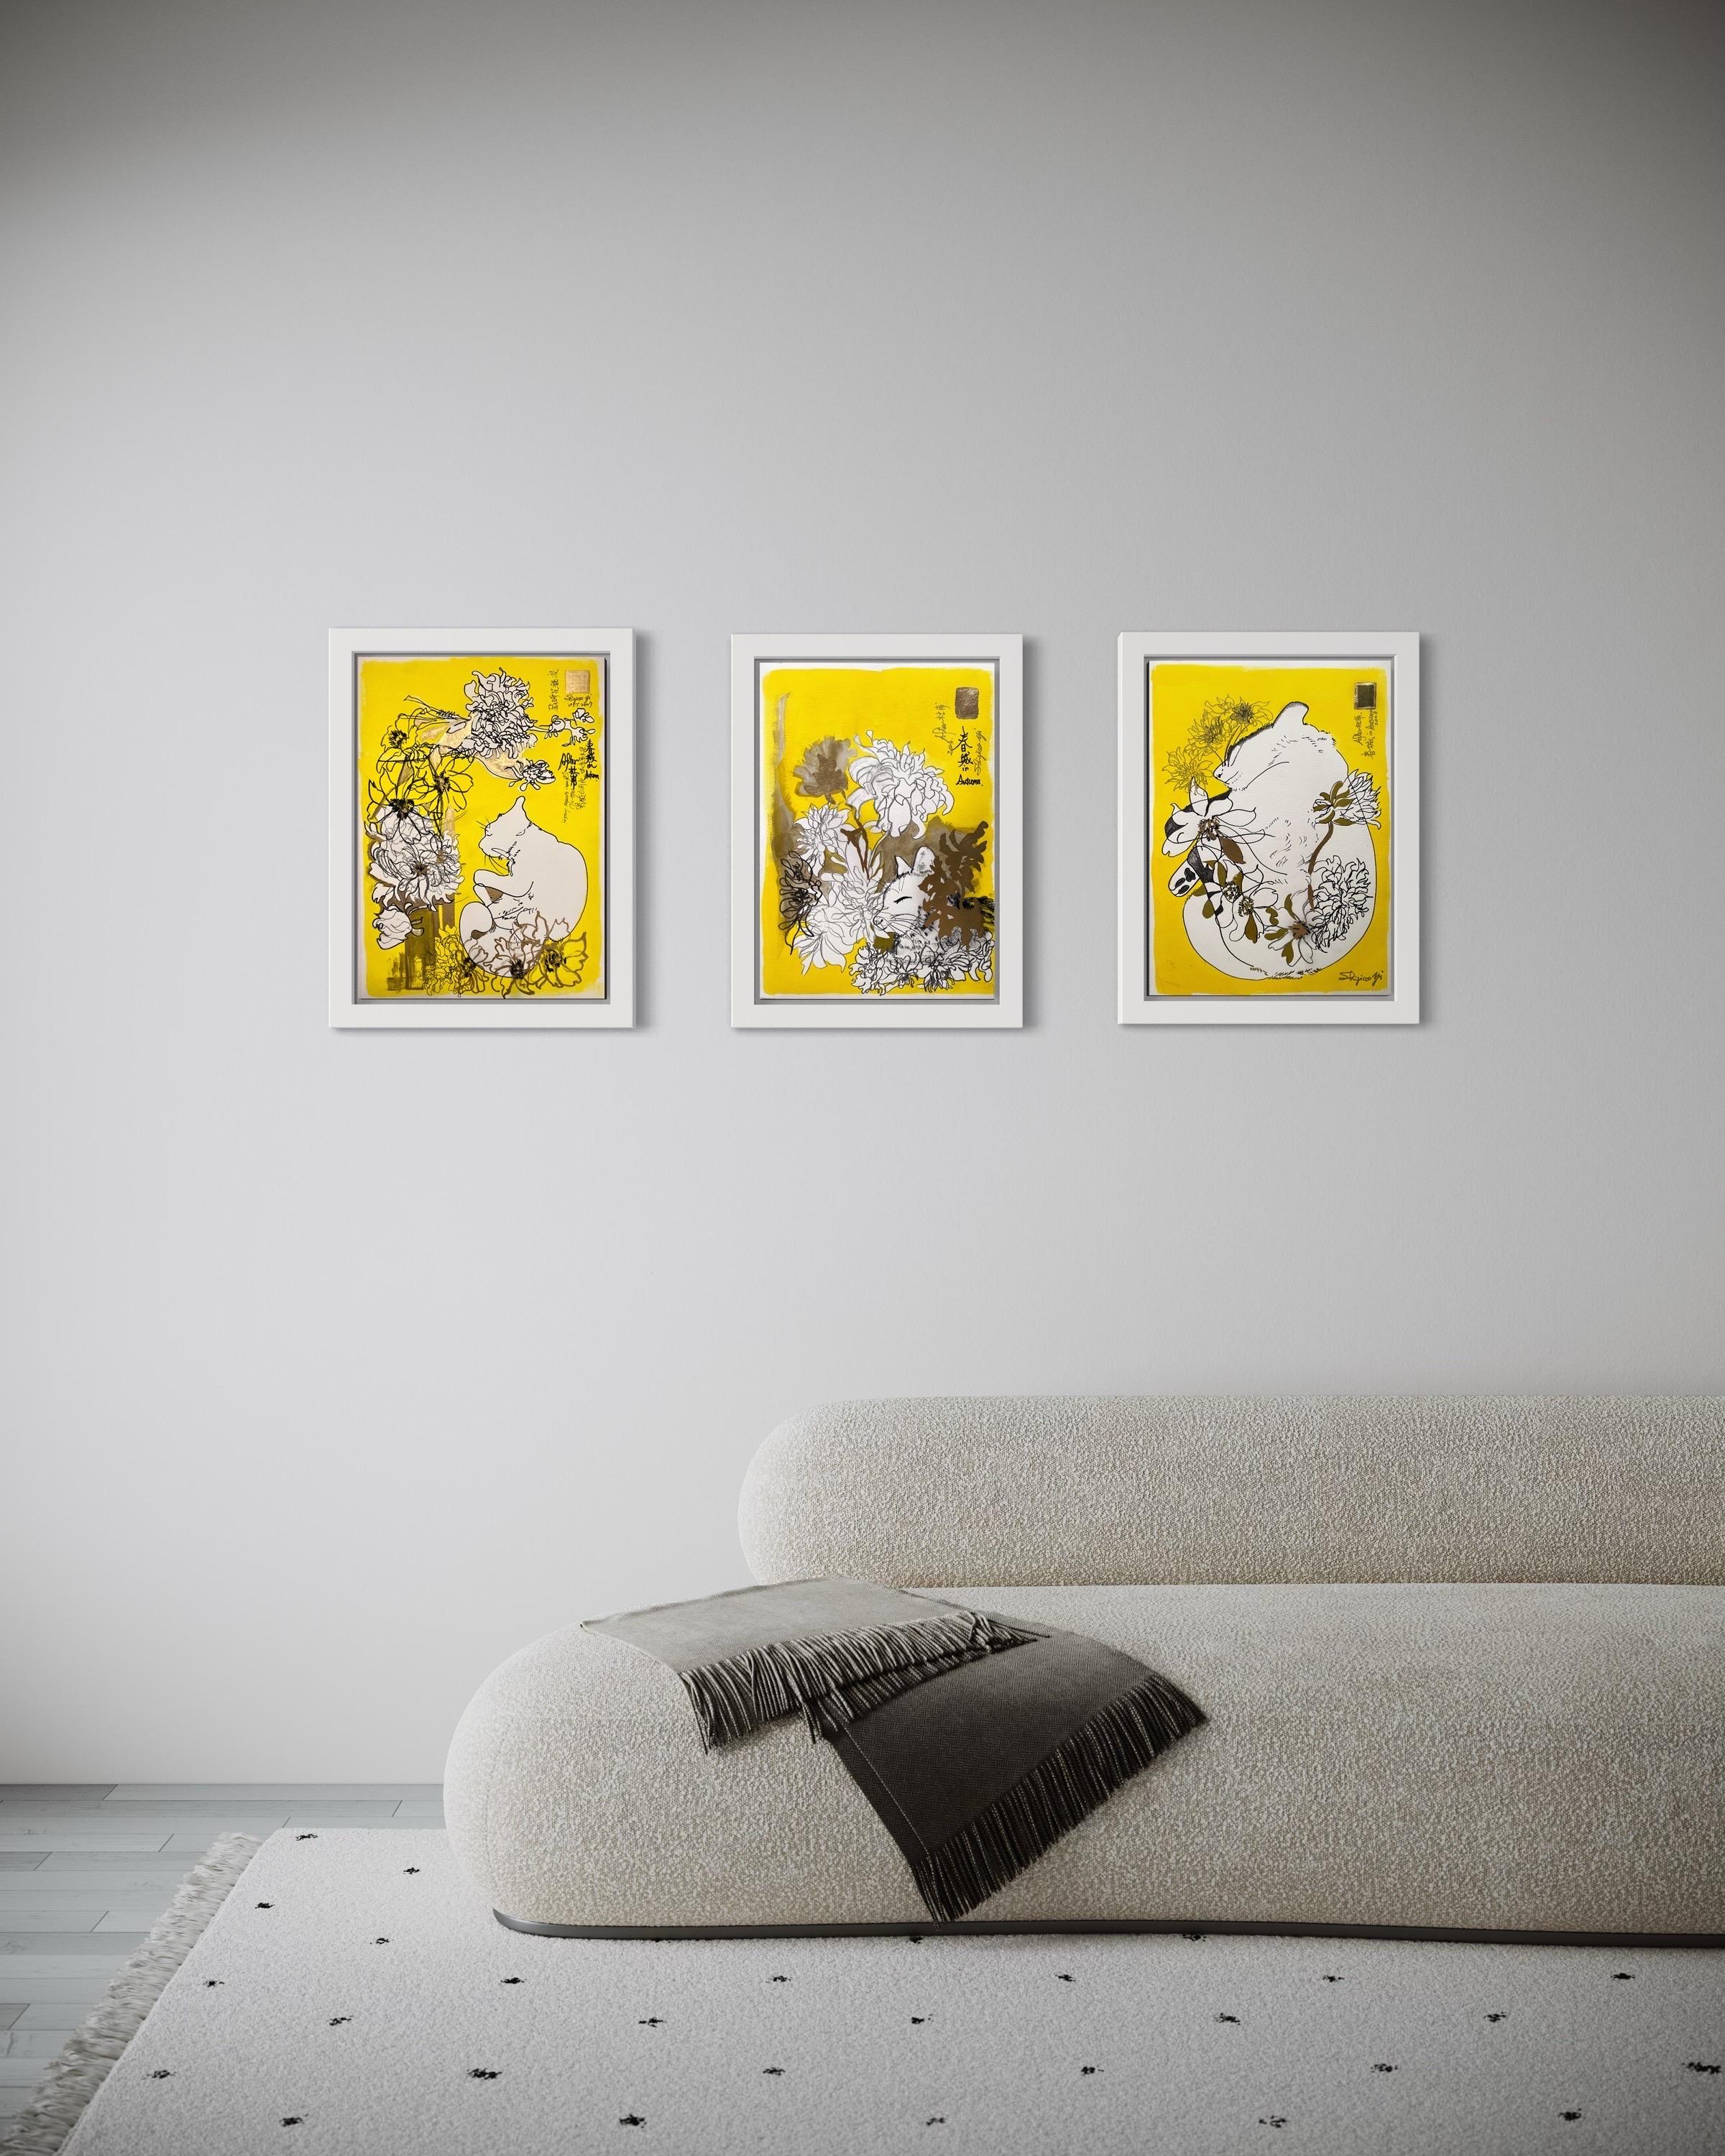 * Varnished, ready to be dispatched, in time for Christmas delivery worldwide guarantee if ordered now.
A set of three original works on paper, available in a special holiday season offer. These highly collectible original drawings are rarely